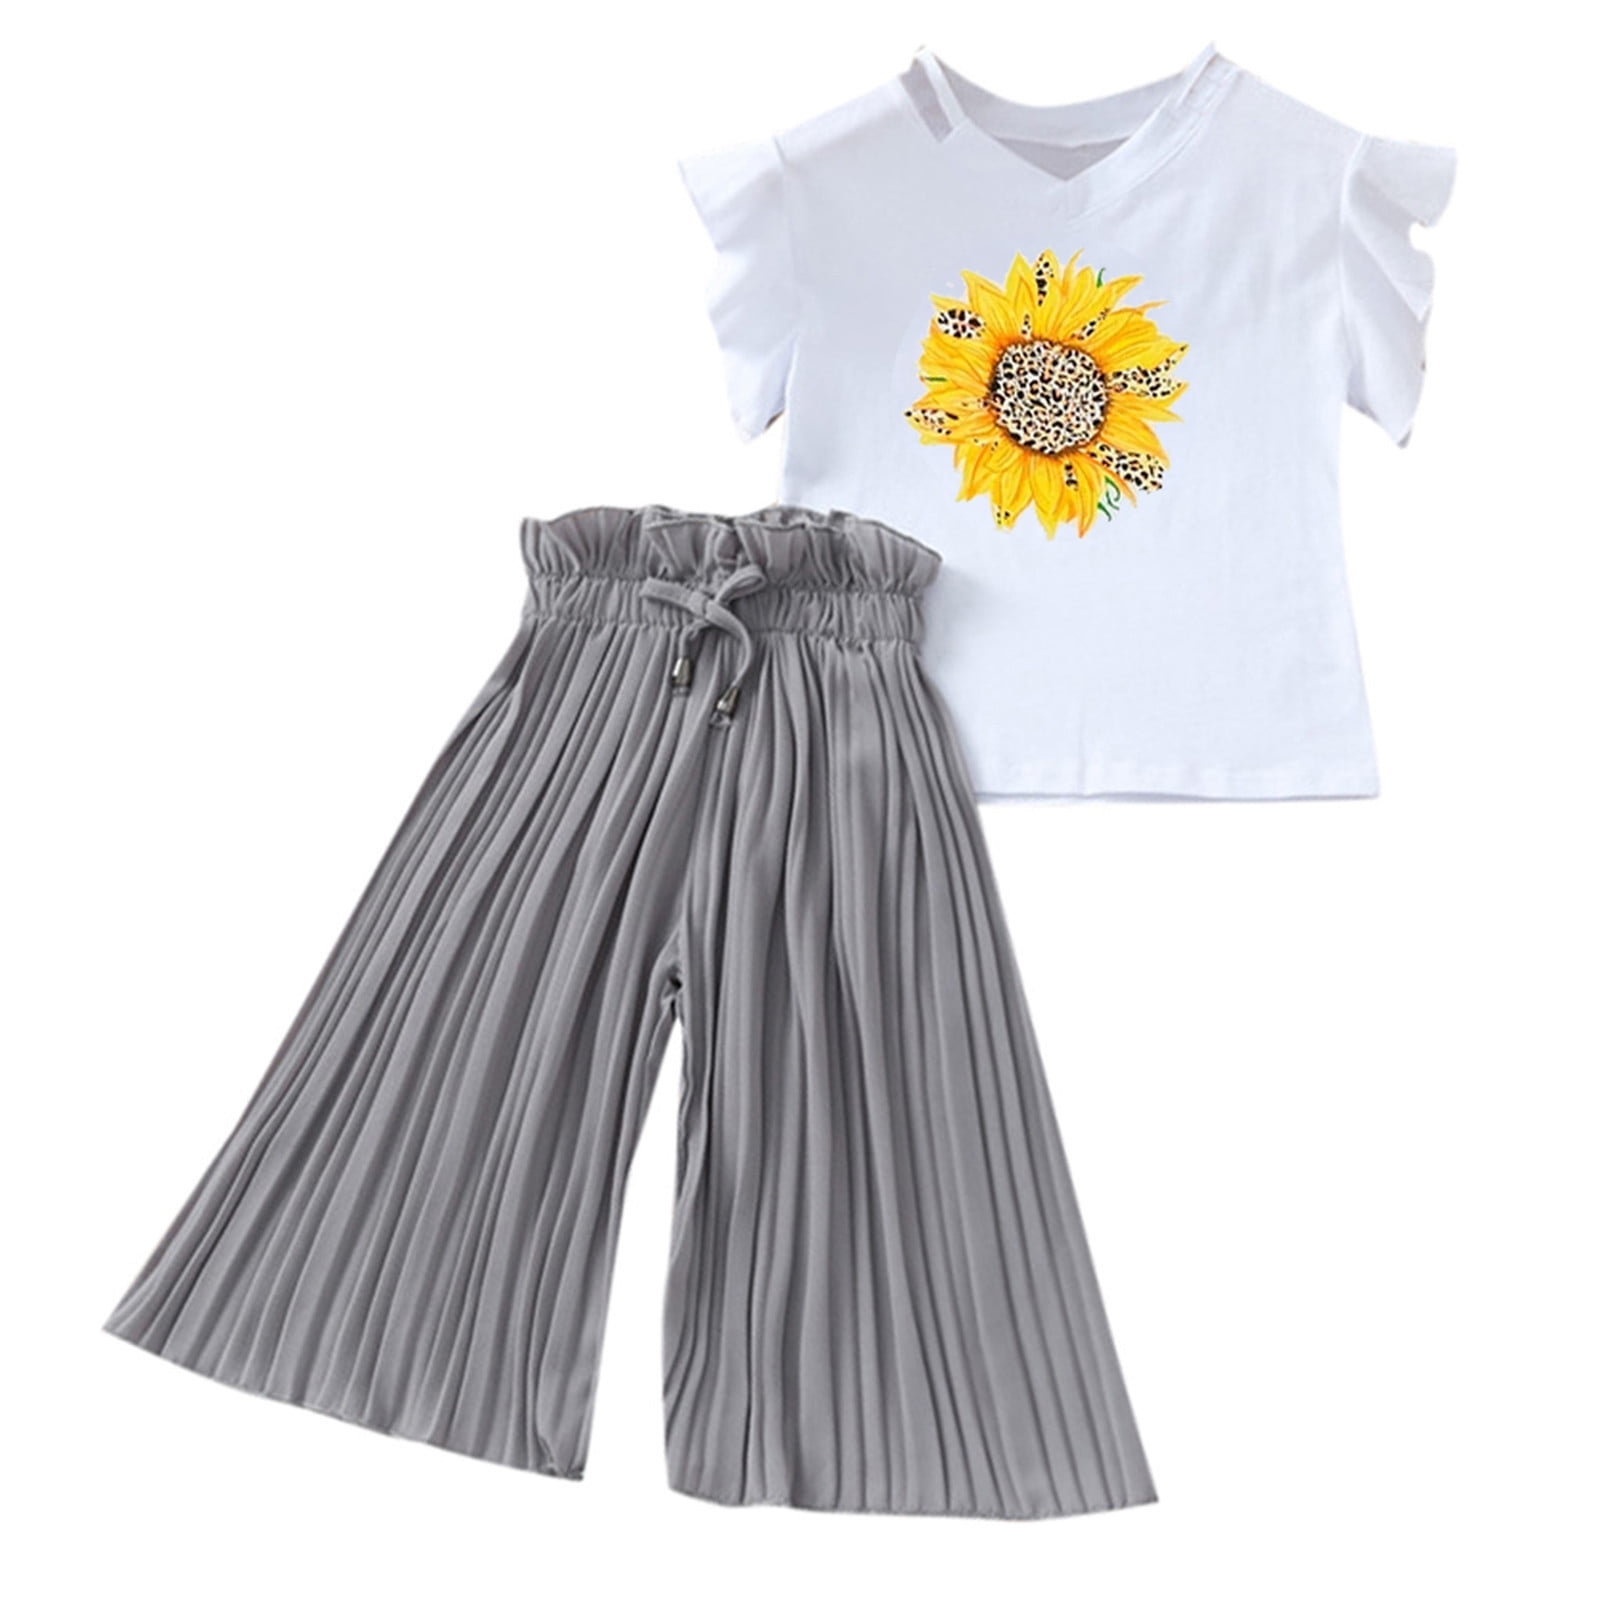 KI-8jcuD Cute Shirts For Girls 10-12 Years Old Toddler Kids Girls Clothing  Sets Summer Sunflower T Shirt Tops Chiffon Ruched Loose Pants Outfits  Children Clothes Kids And Teens Outfit Girl Baby Clot -